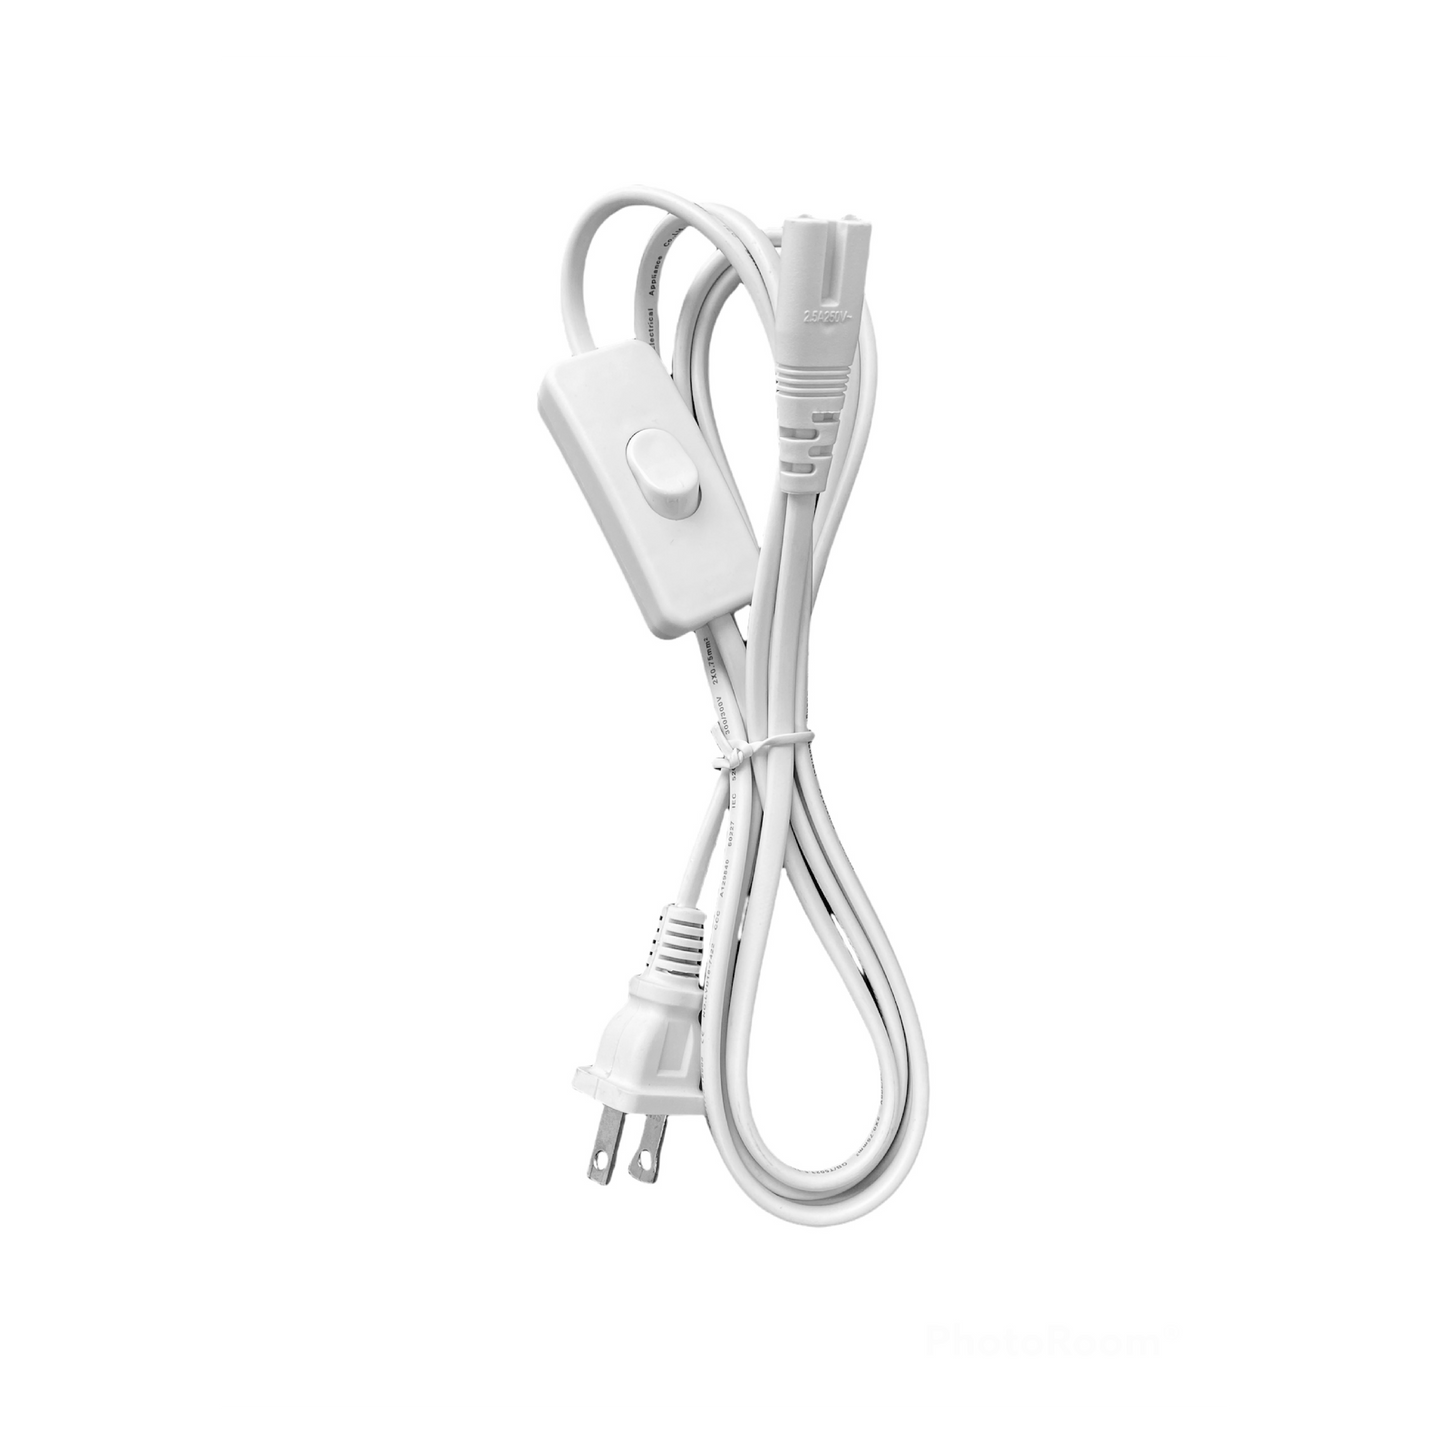 US-plug power cord with inline switch 2000mm (Nurser 3 compatible)